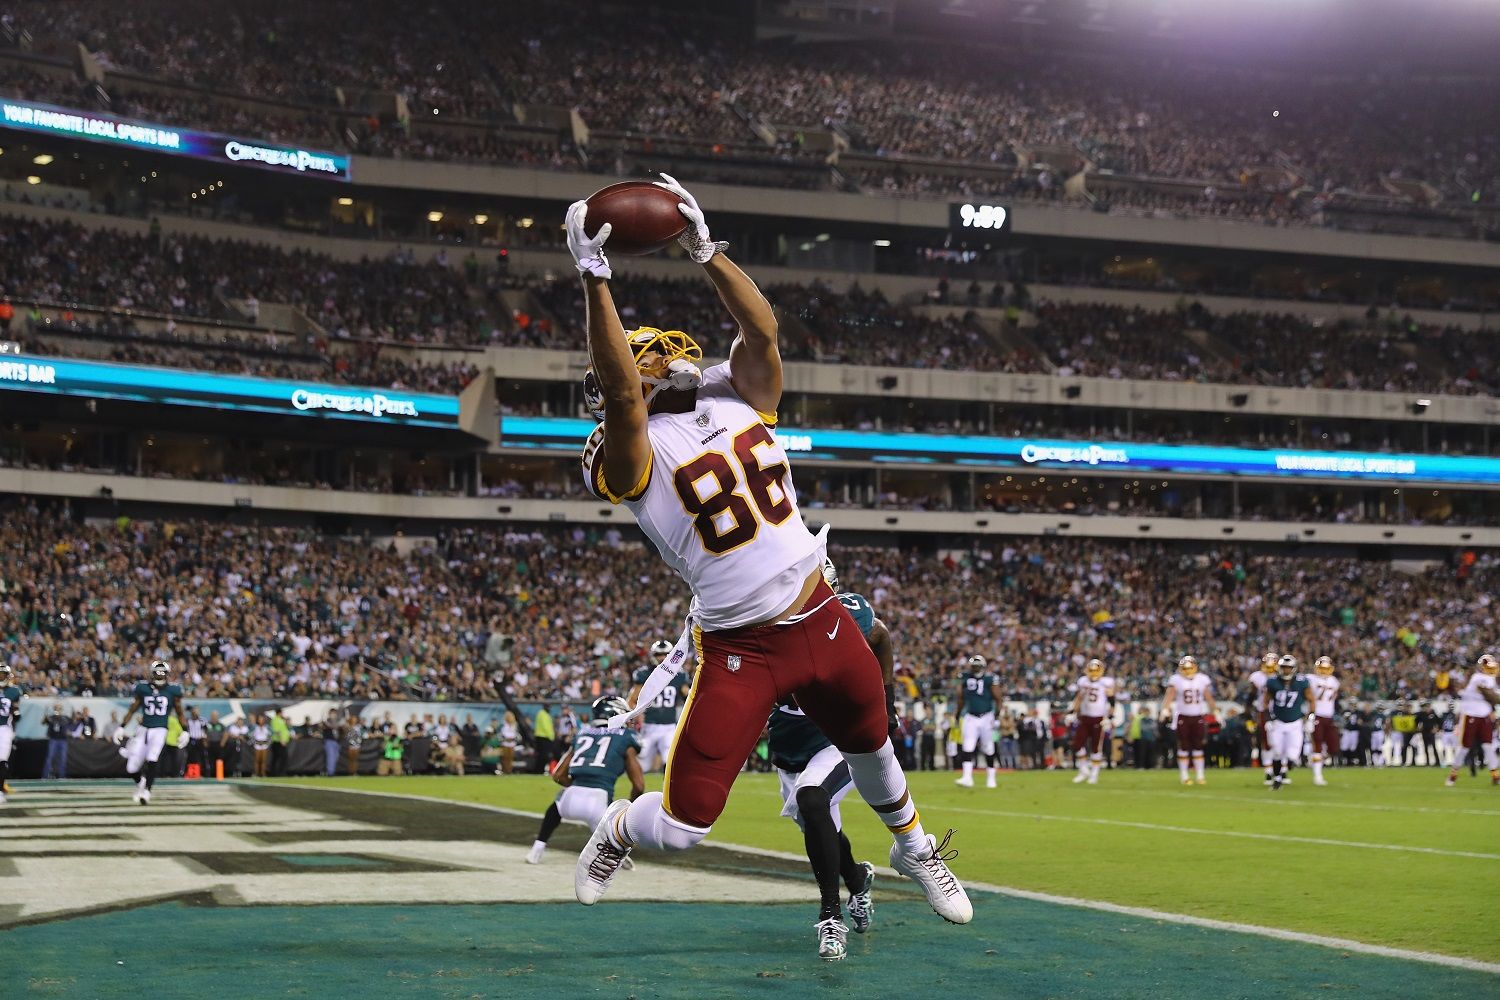 PHILADELPHIA, PA - OCTOBER 23:  Jordan Reed #86 of the Washington Redskins scores a touchdown that is called back during the second quarter of the game against the Philadelphia Eagles at Lincoln Financial Field on October 23, 2017 in Philadelphia, Pennsylvania.  (Photo by Elsa/Getty Images)